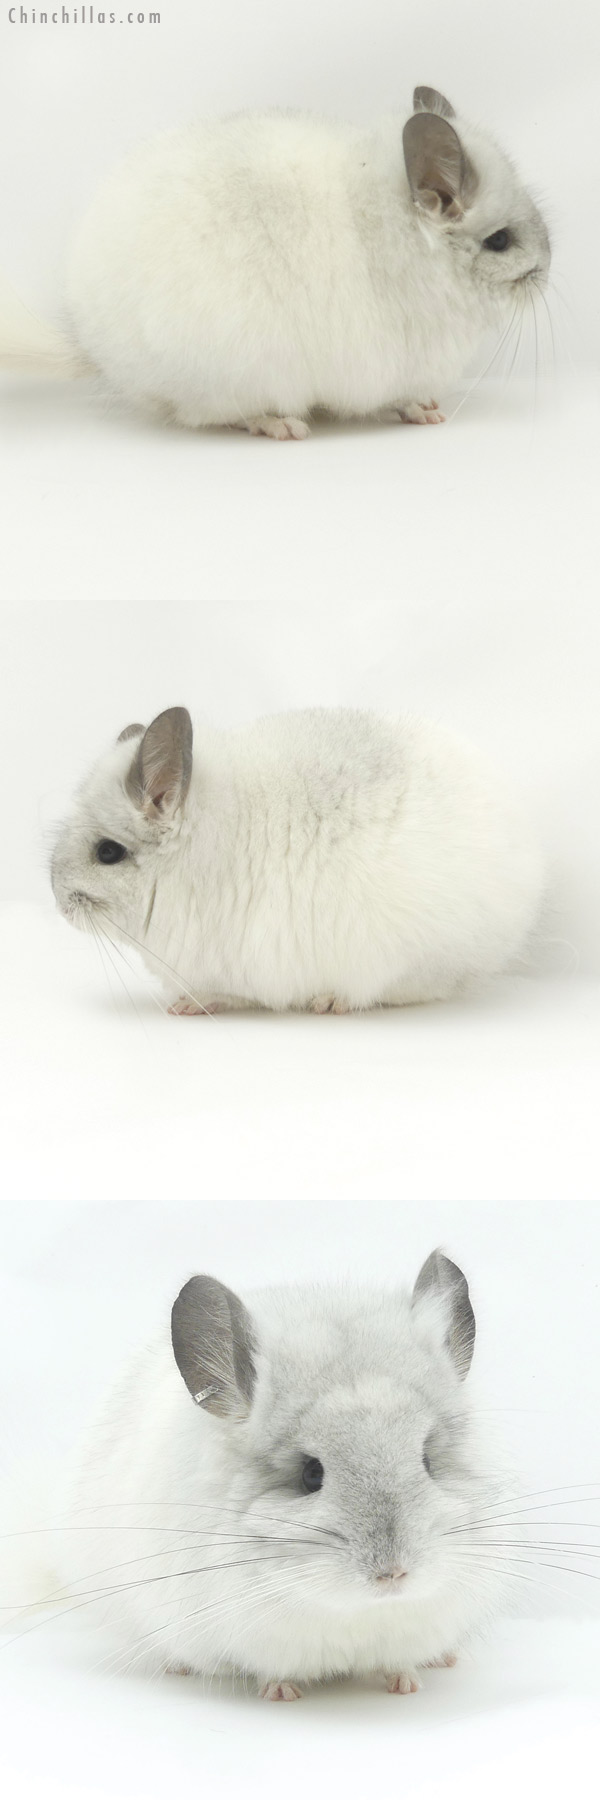 Chinchilla or related item offered for sale or export on Chinchillas.com - 19448 White Mosaic  Royal Persian Angora Female Chinchilla